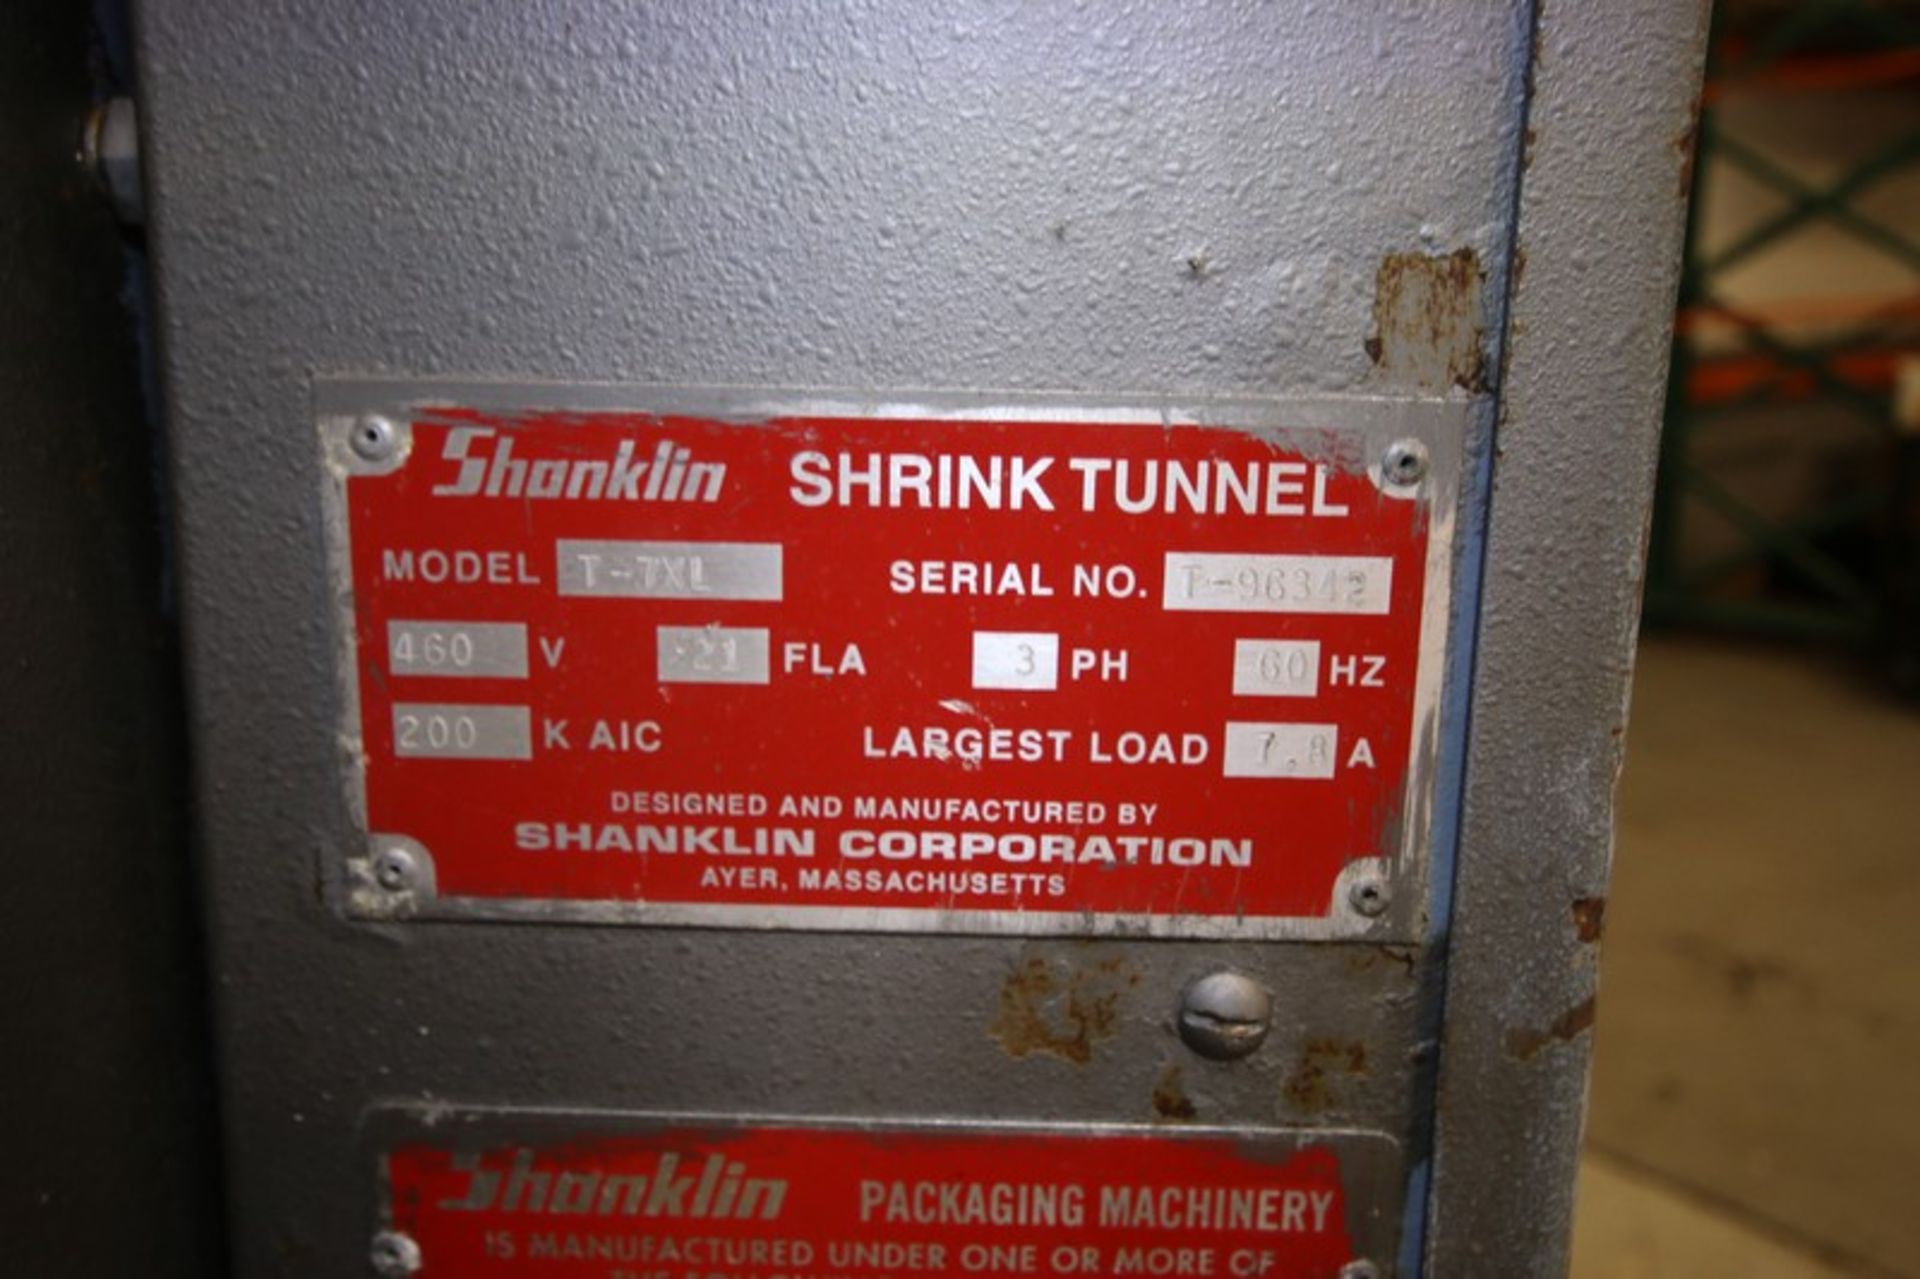 Shanklin 15" W x 9"H, Shrink Wrap Heat Tunnel, Model T-7XL, SN T-96342, 460 V 3 Phase, Mounted on - Image 10 of 10